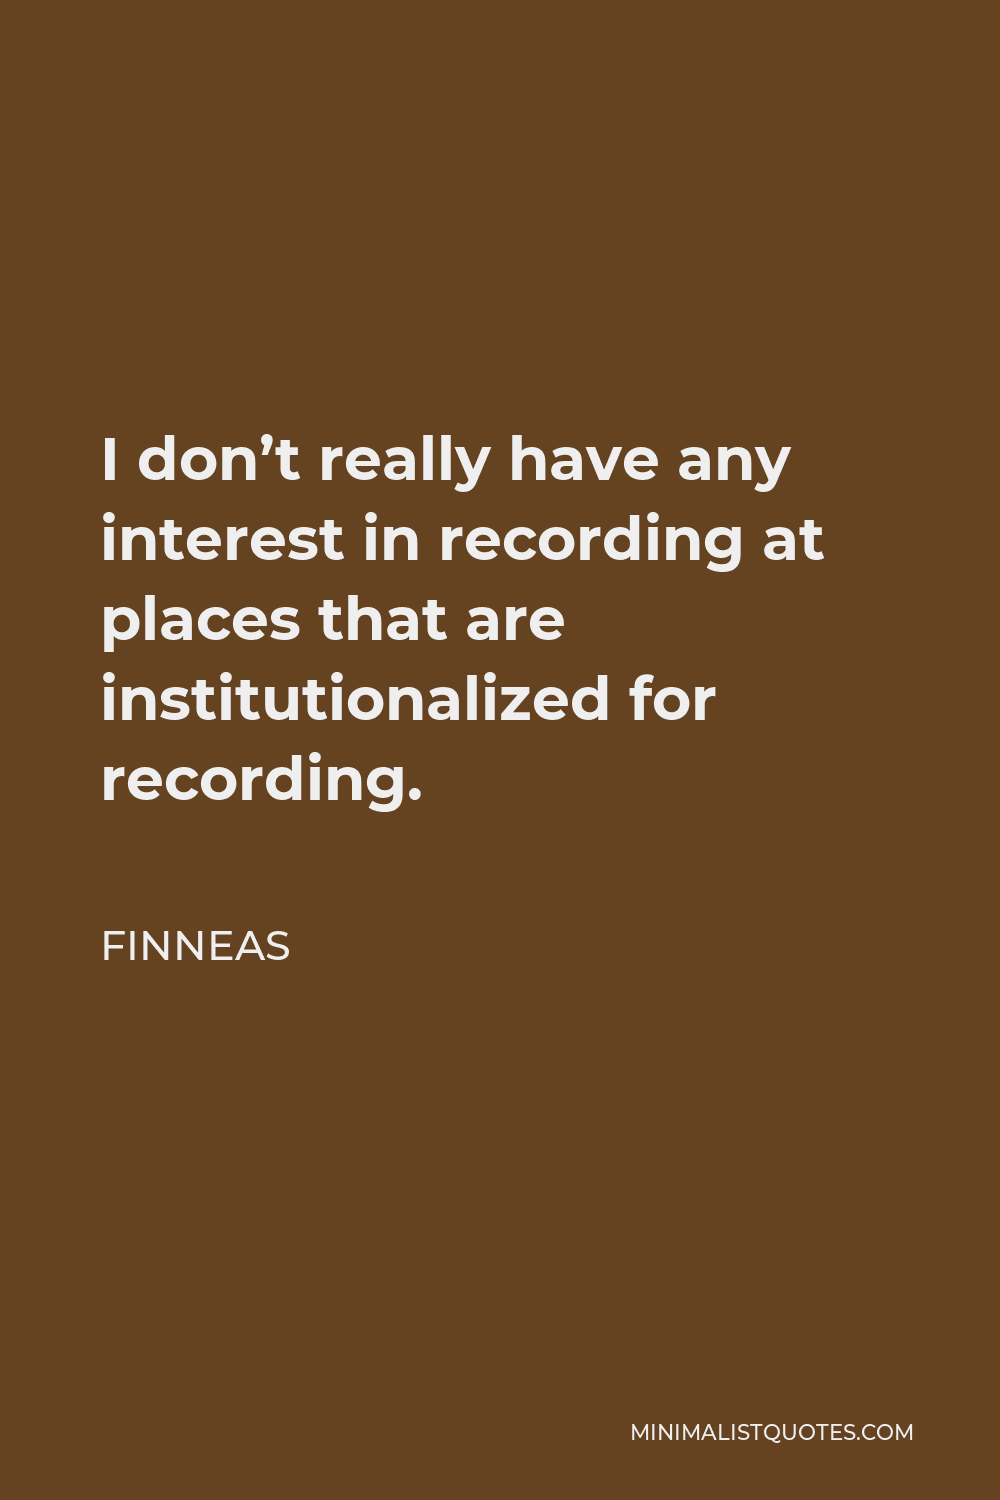 Finneas Quote - I don’t really have any interest in recording at places that are institutionalized for recording.